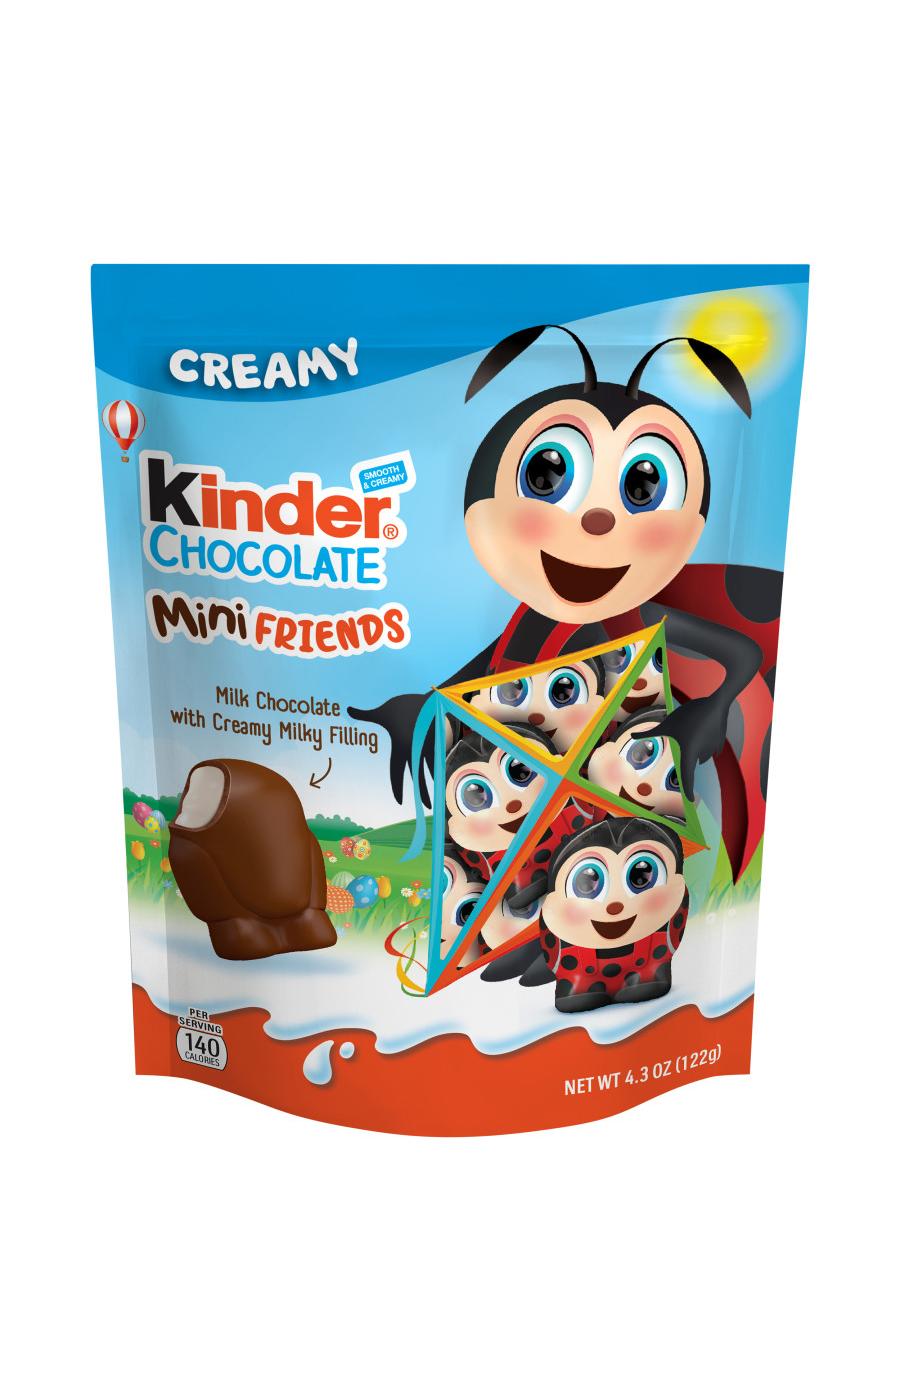 Kinder Creamy Chocolate Mini Friends Easter Candy; image 1 of 2